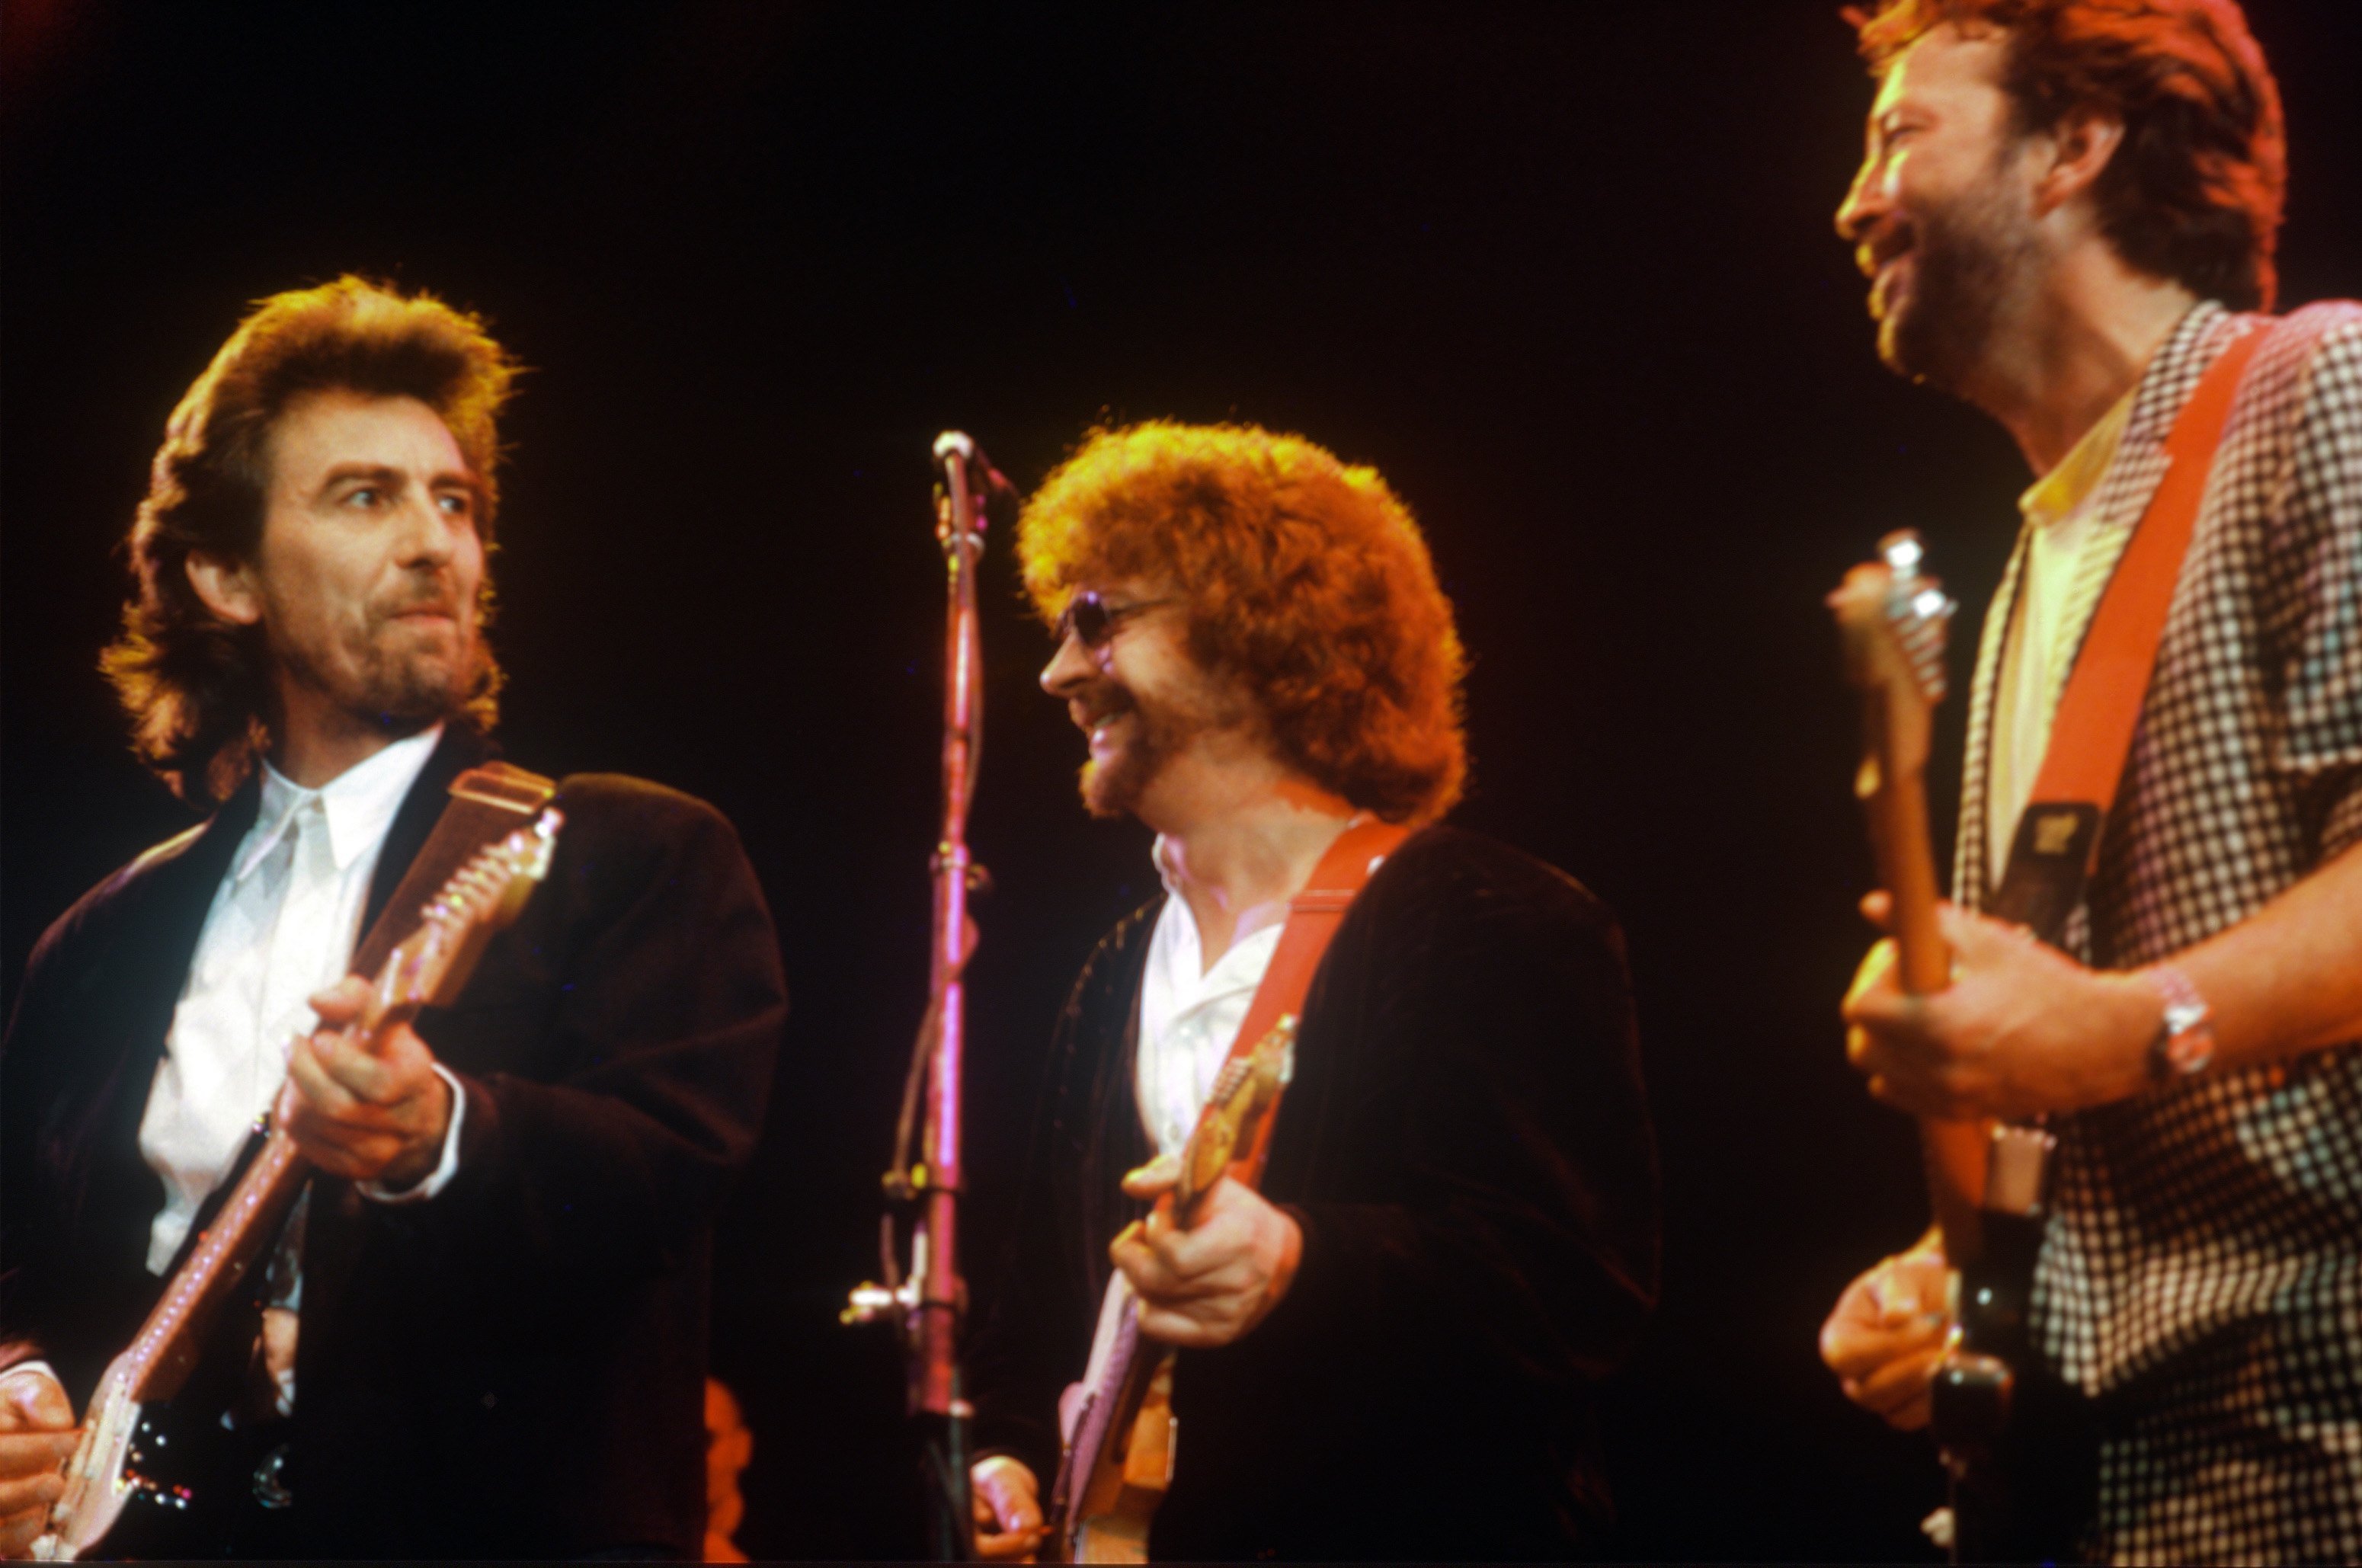 George Harrison, Jeff Lynne, and Eric Clapton perform at the Prince's Trust Concert in London, England, in 1987